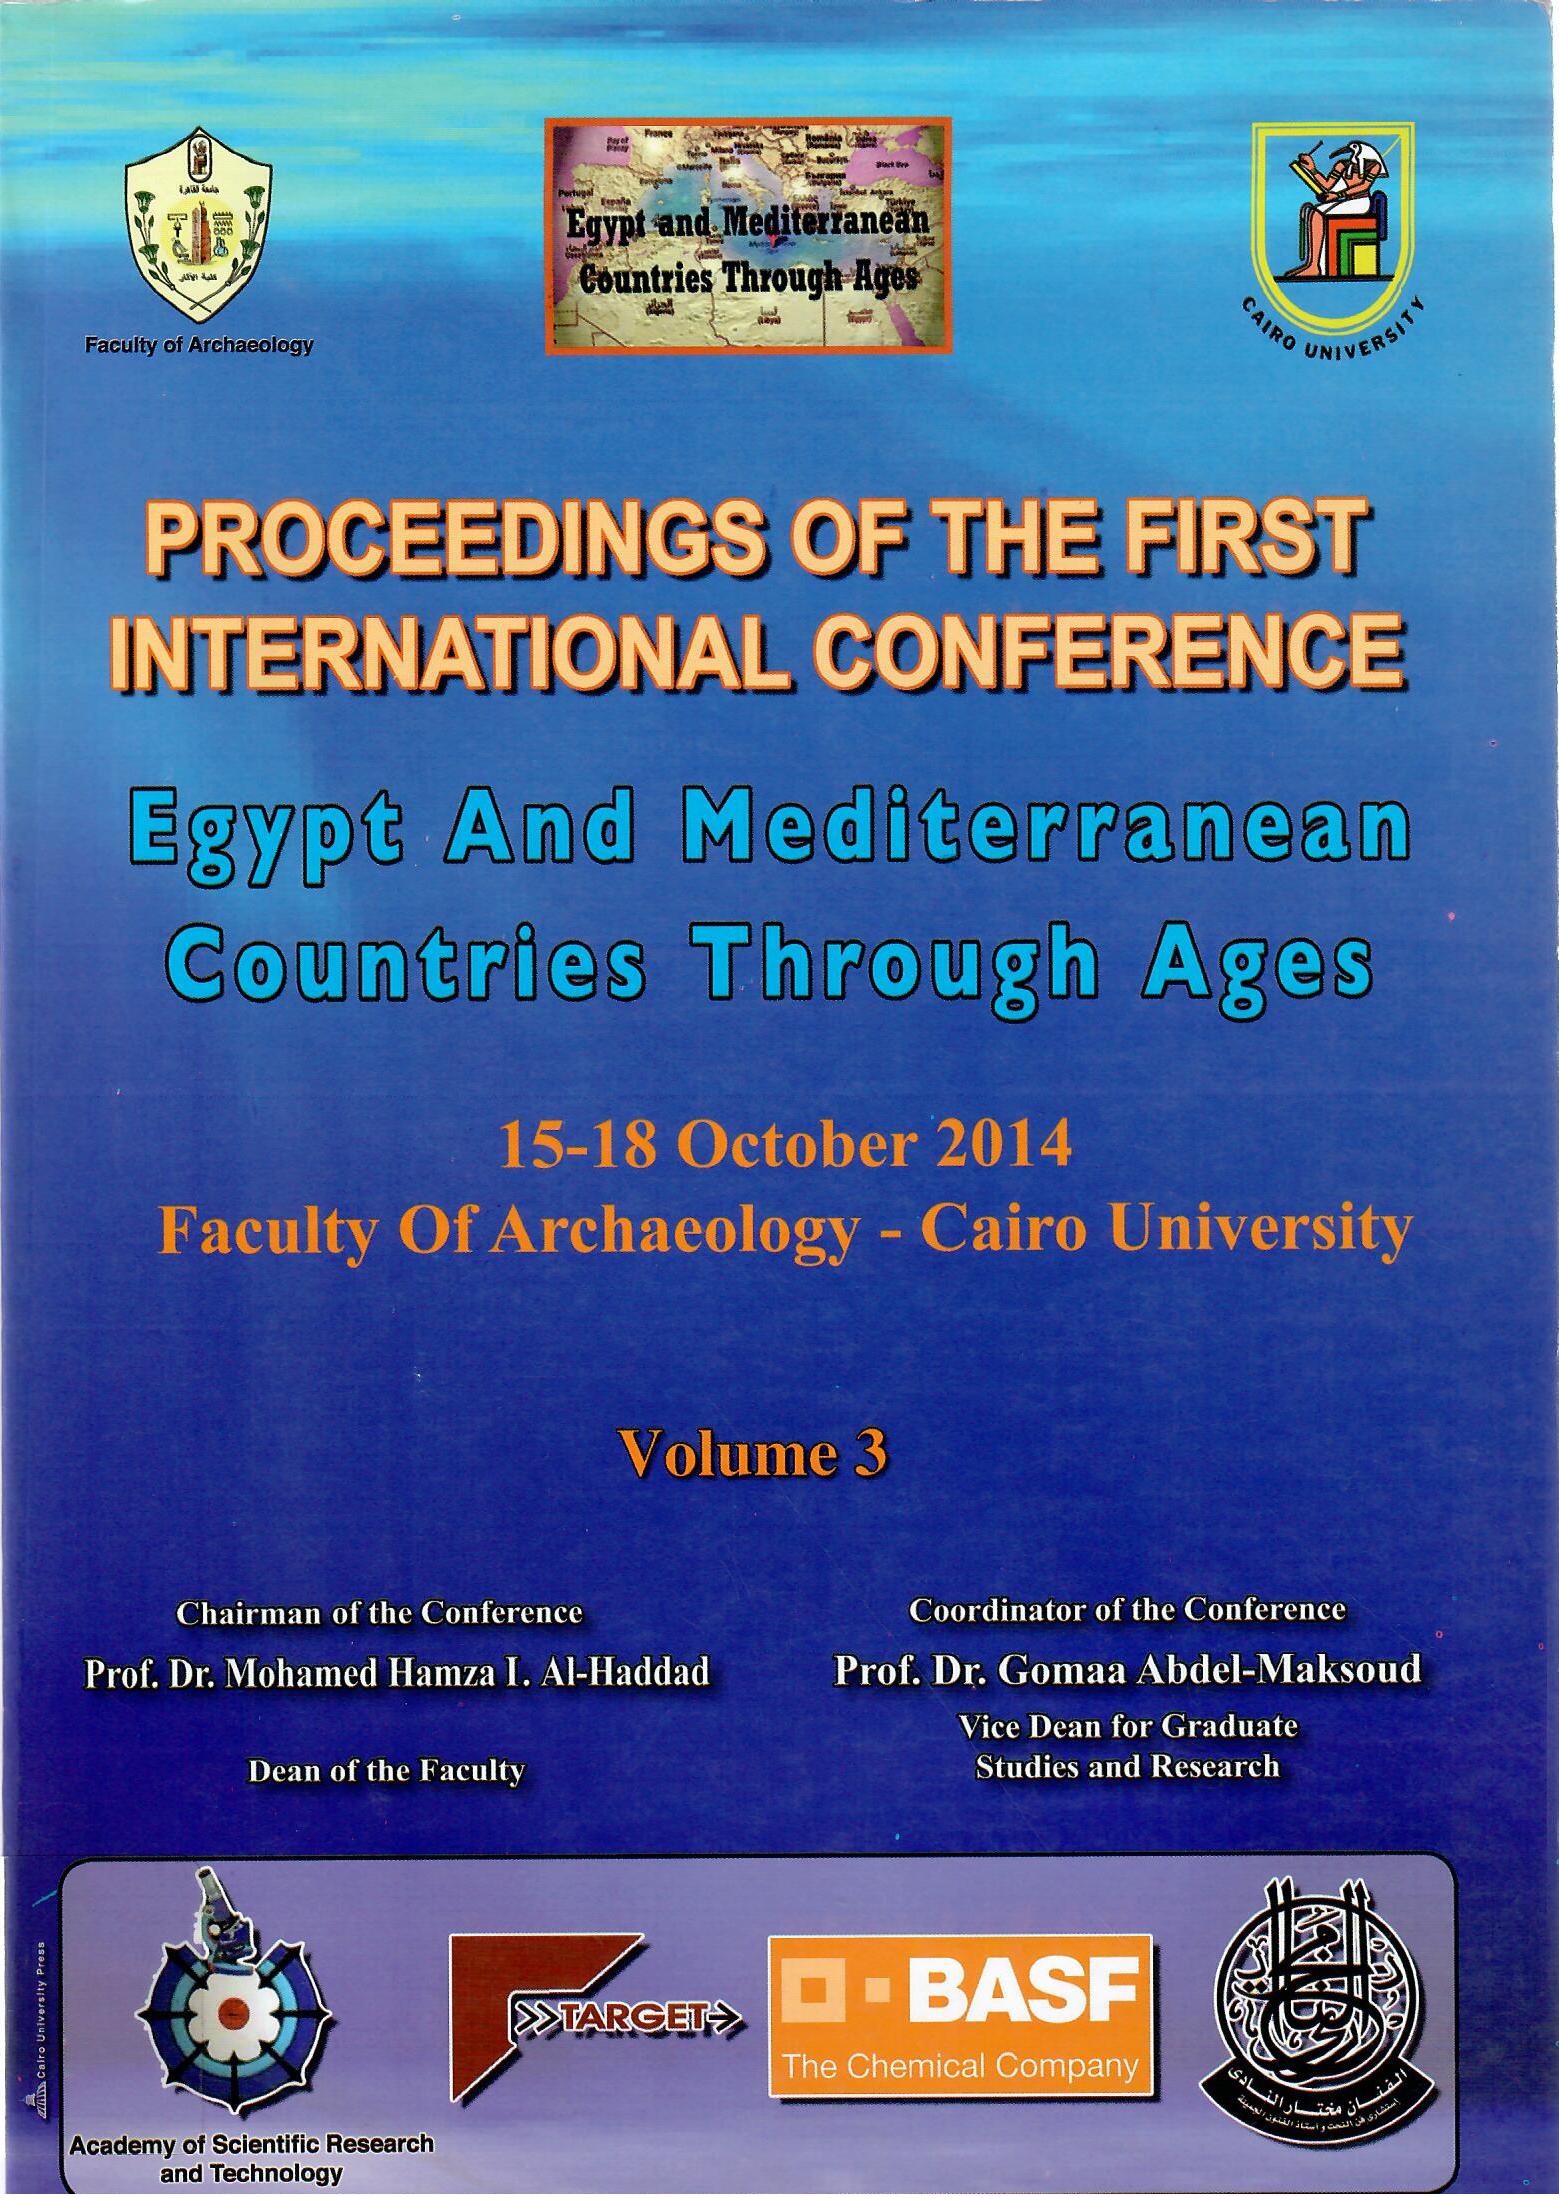 PROCEEDINGS OF THE FIRST INTERNATIONAL CONFERENCE